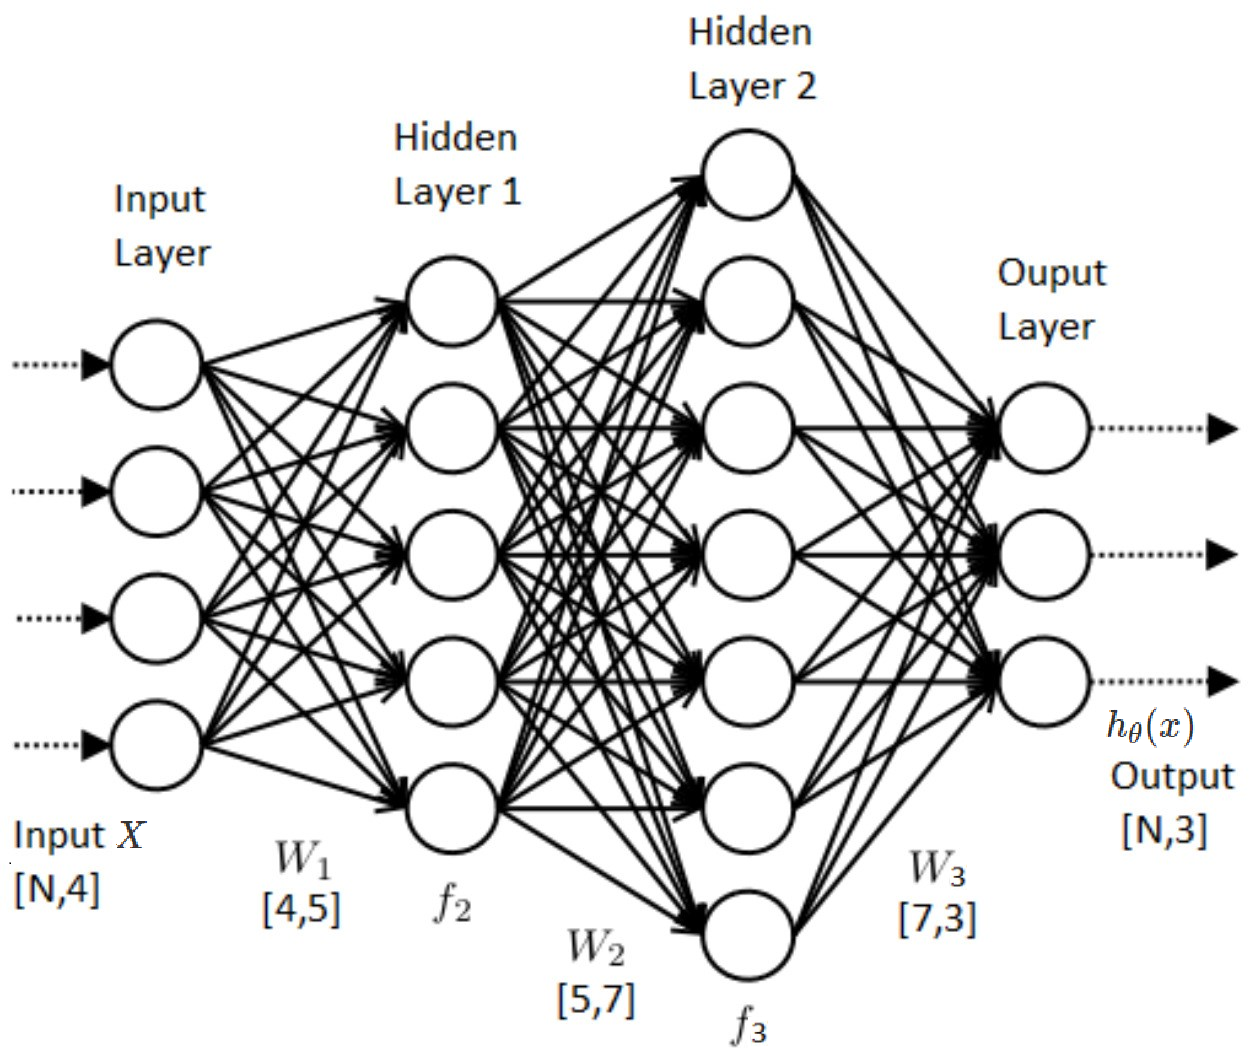 Everything you need to know about Neural Networks and Backpropagation